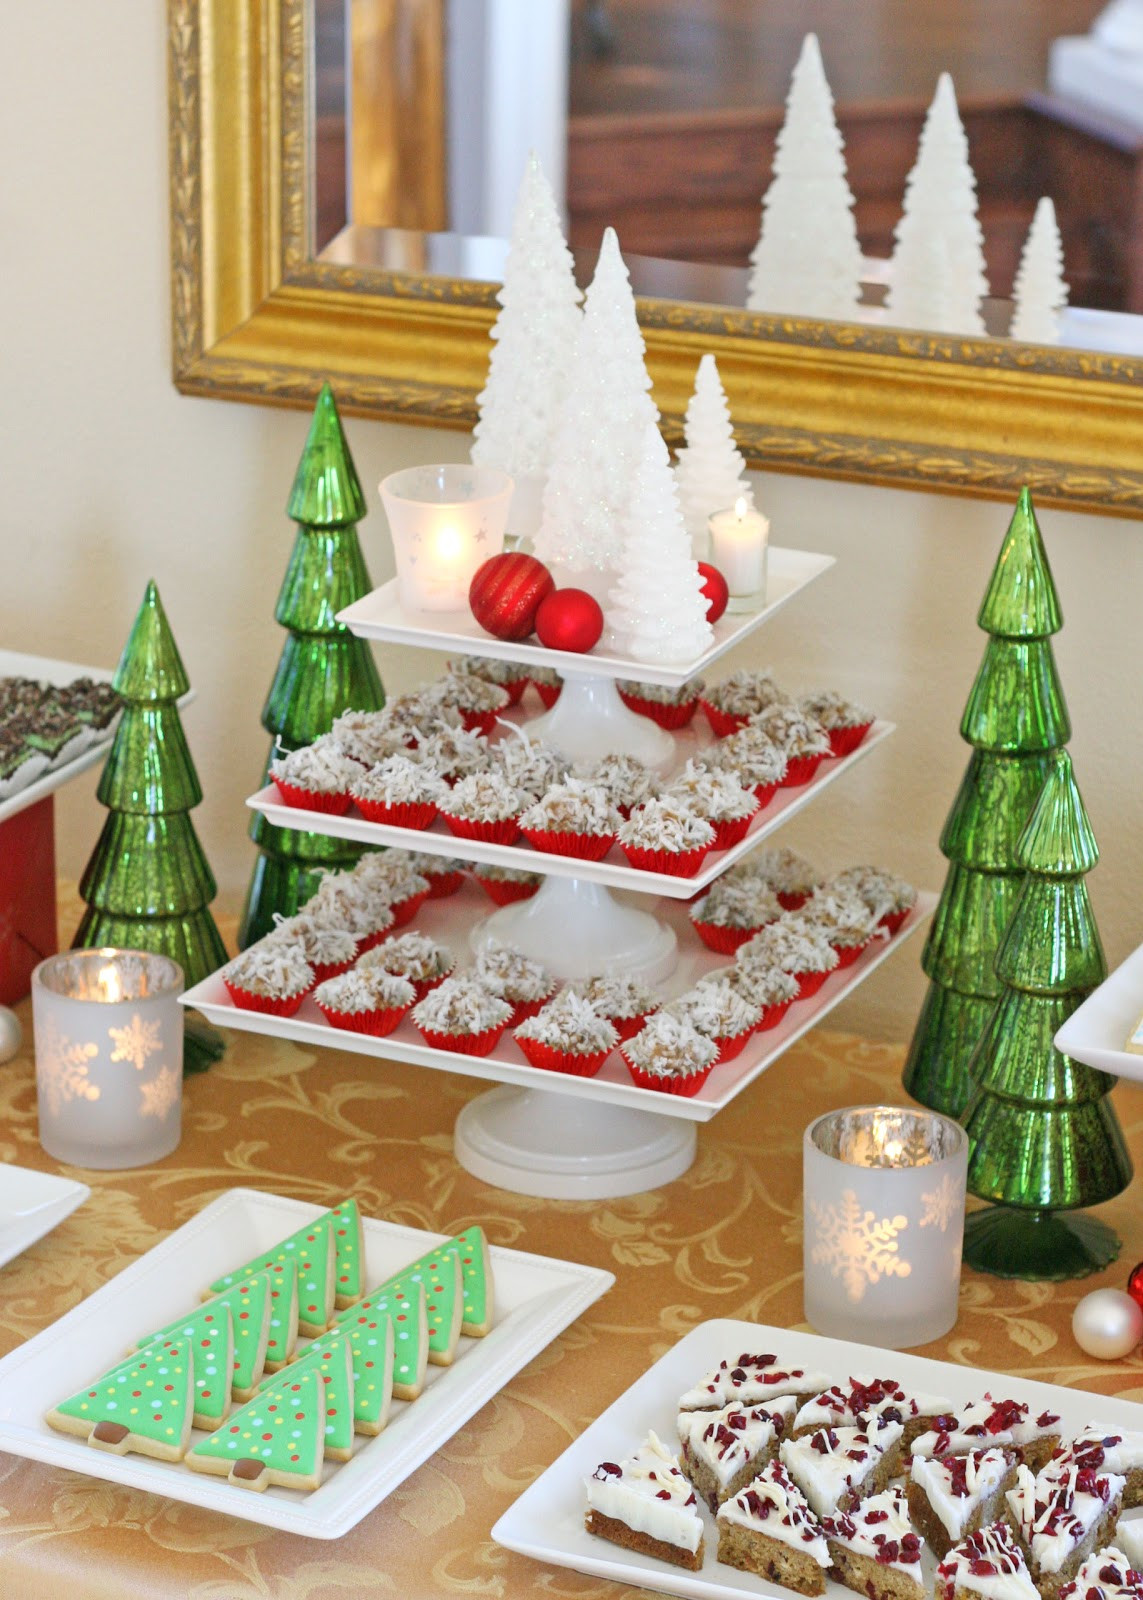 Pictures Of Christmas Desserts
 Classic Holiday Dessert Table Glorious Treats